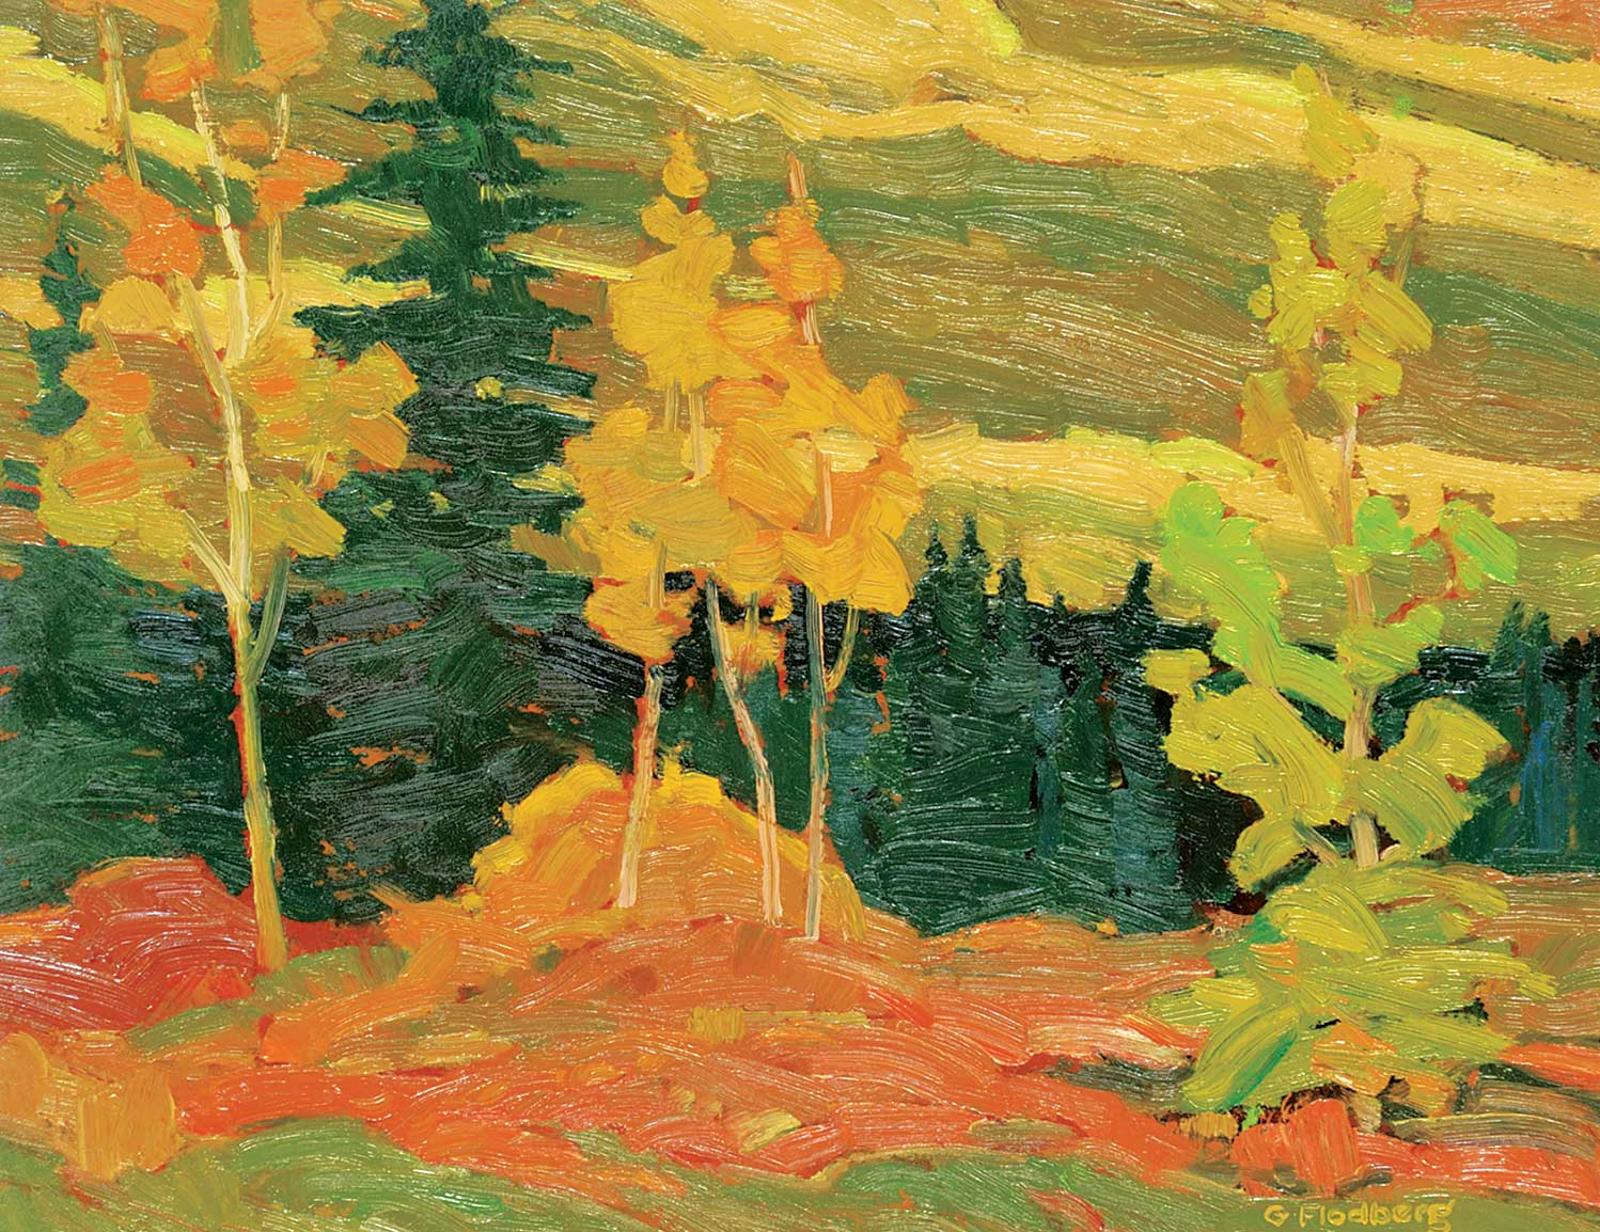 Gilbert A. Flodberg (1938) - Untitled - Fall Colours